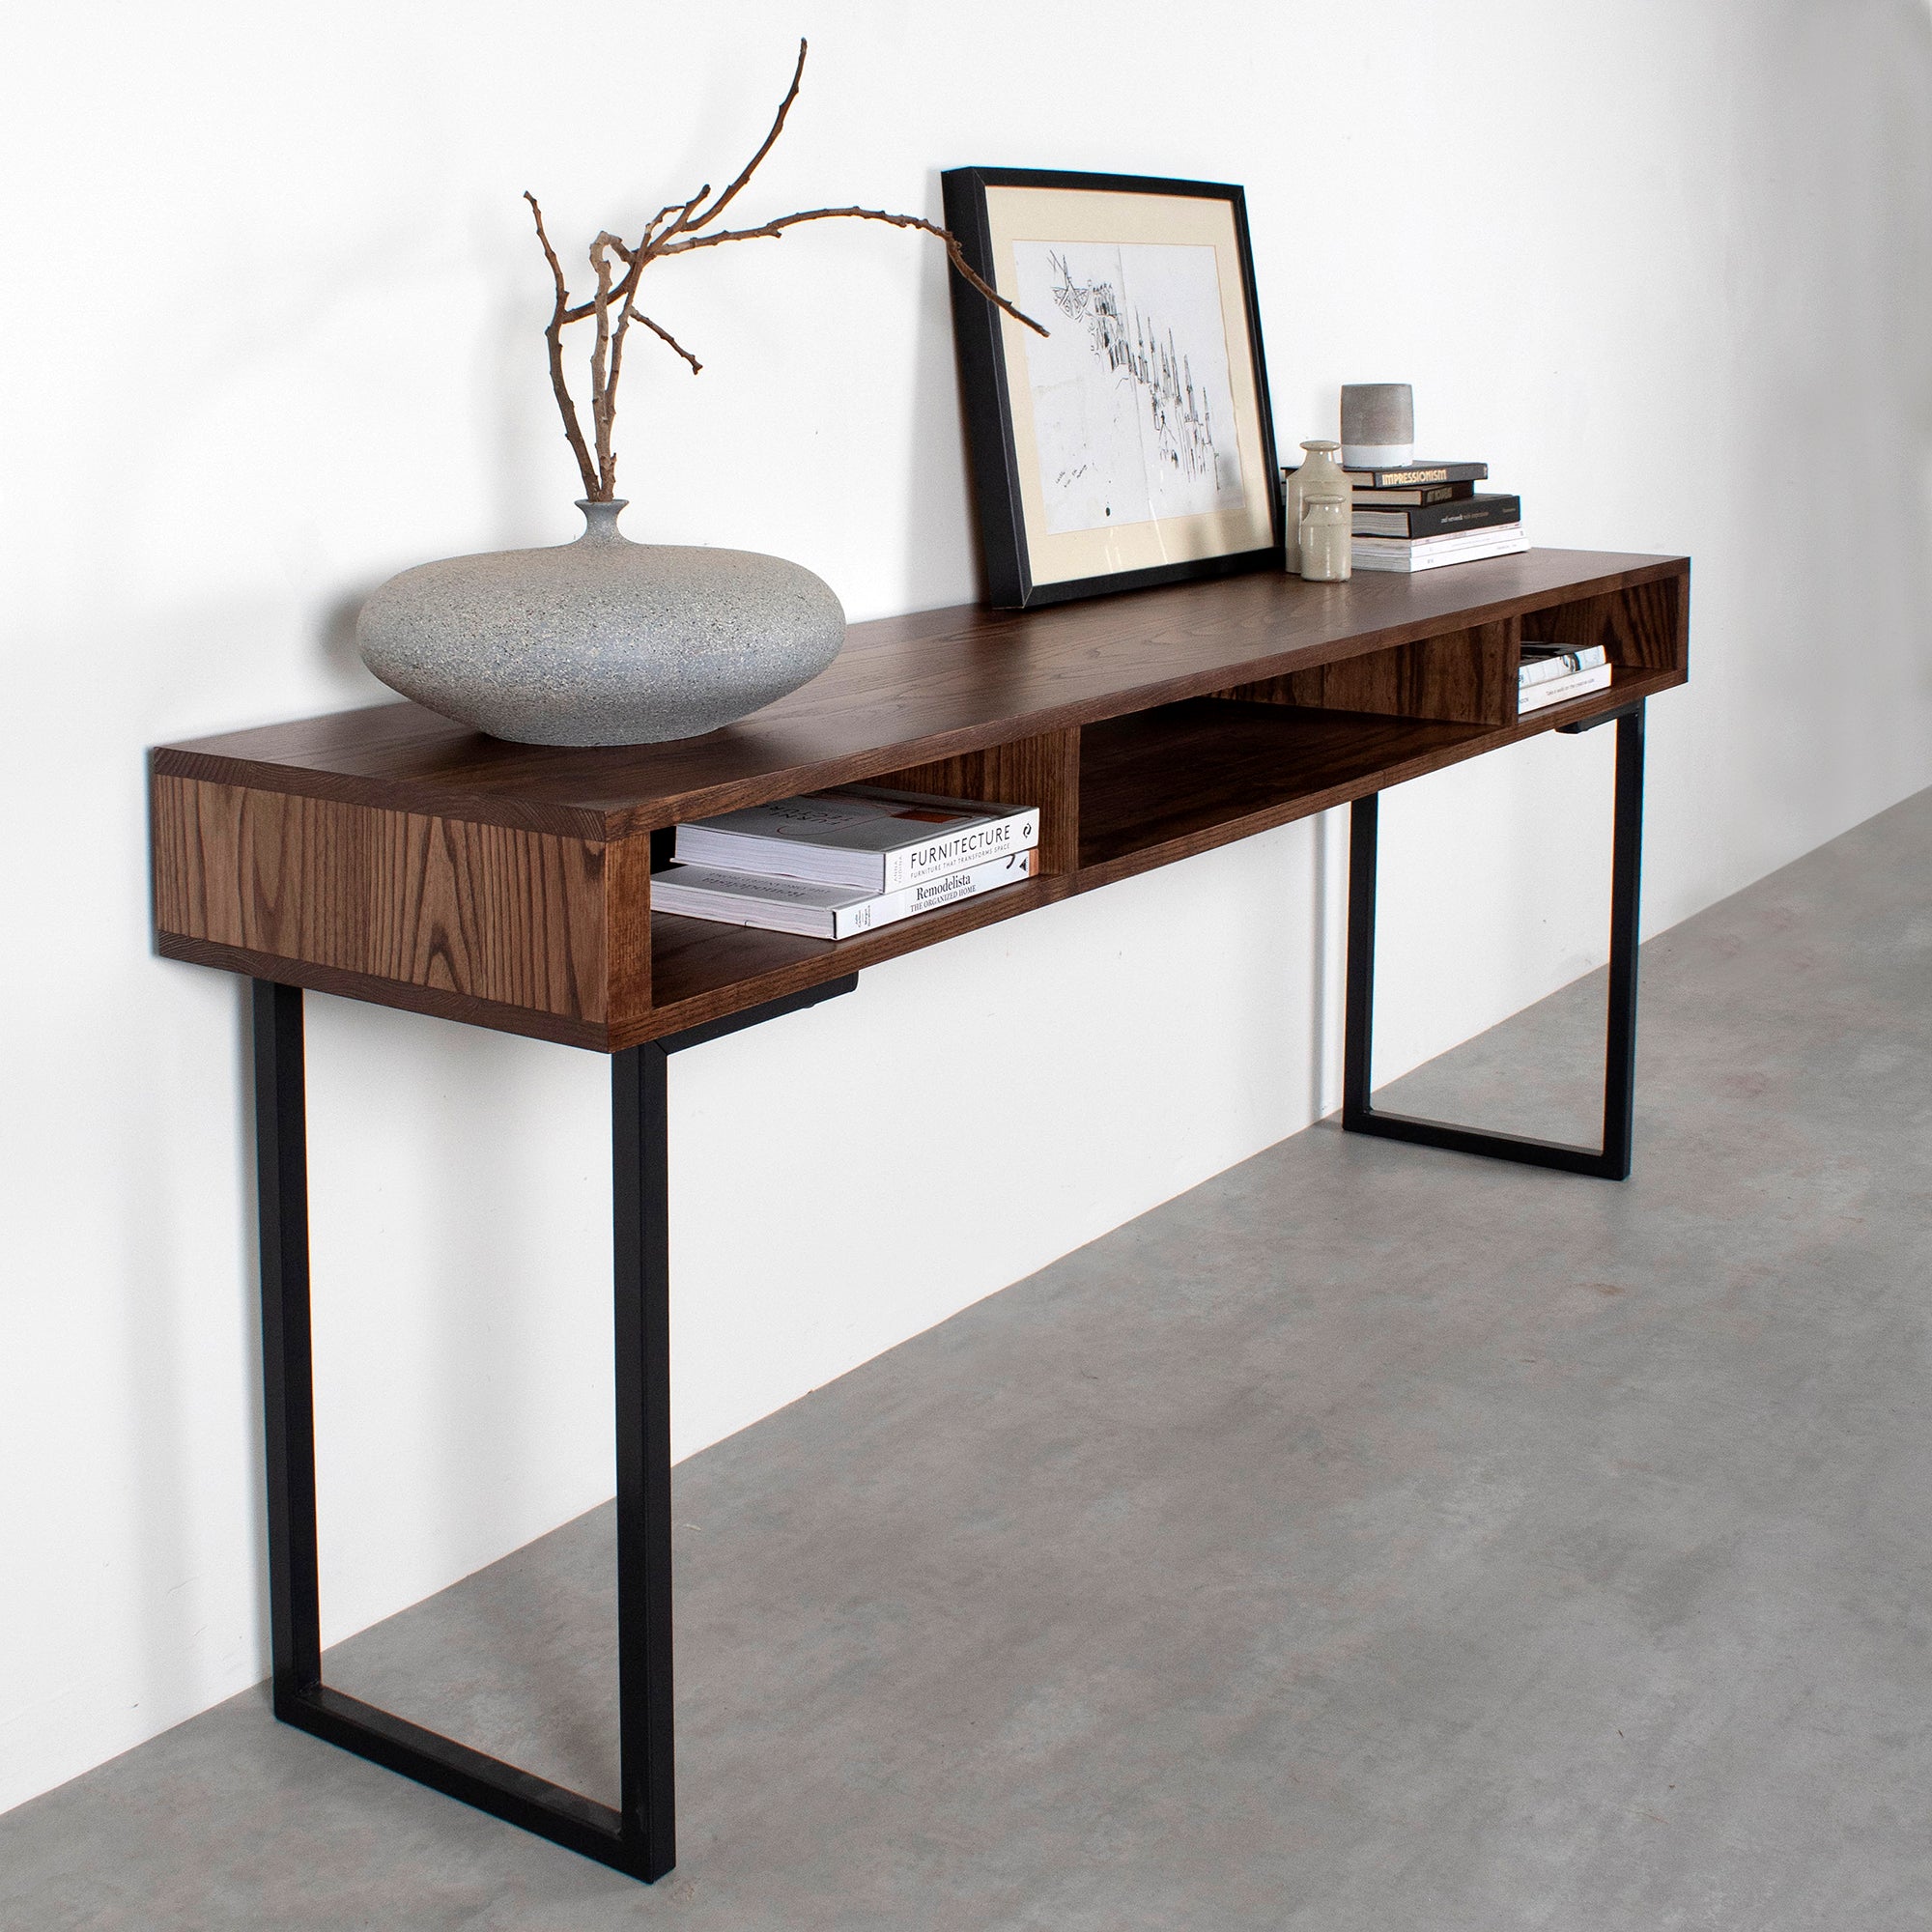 Focus on... console tables